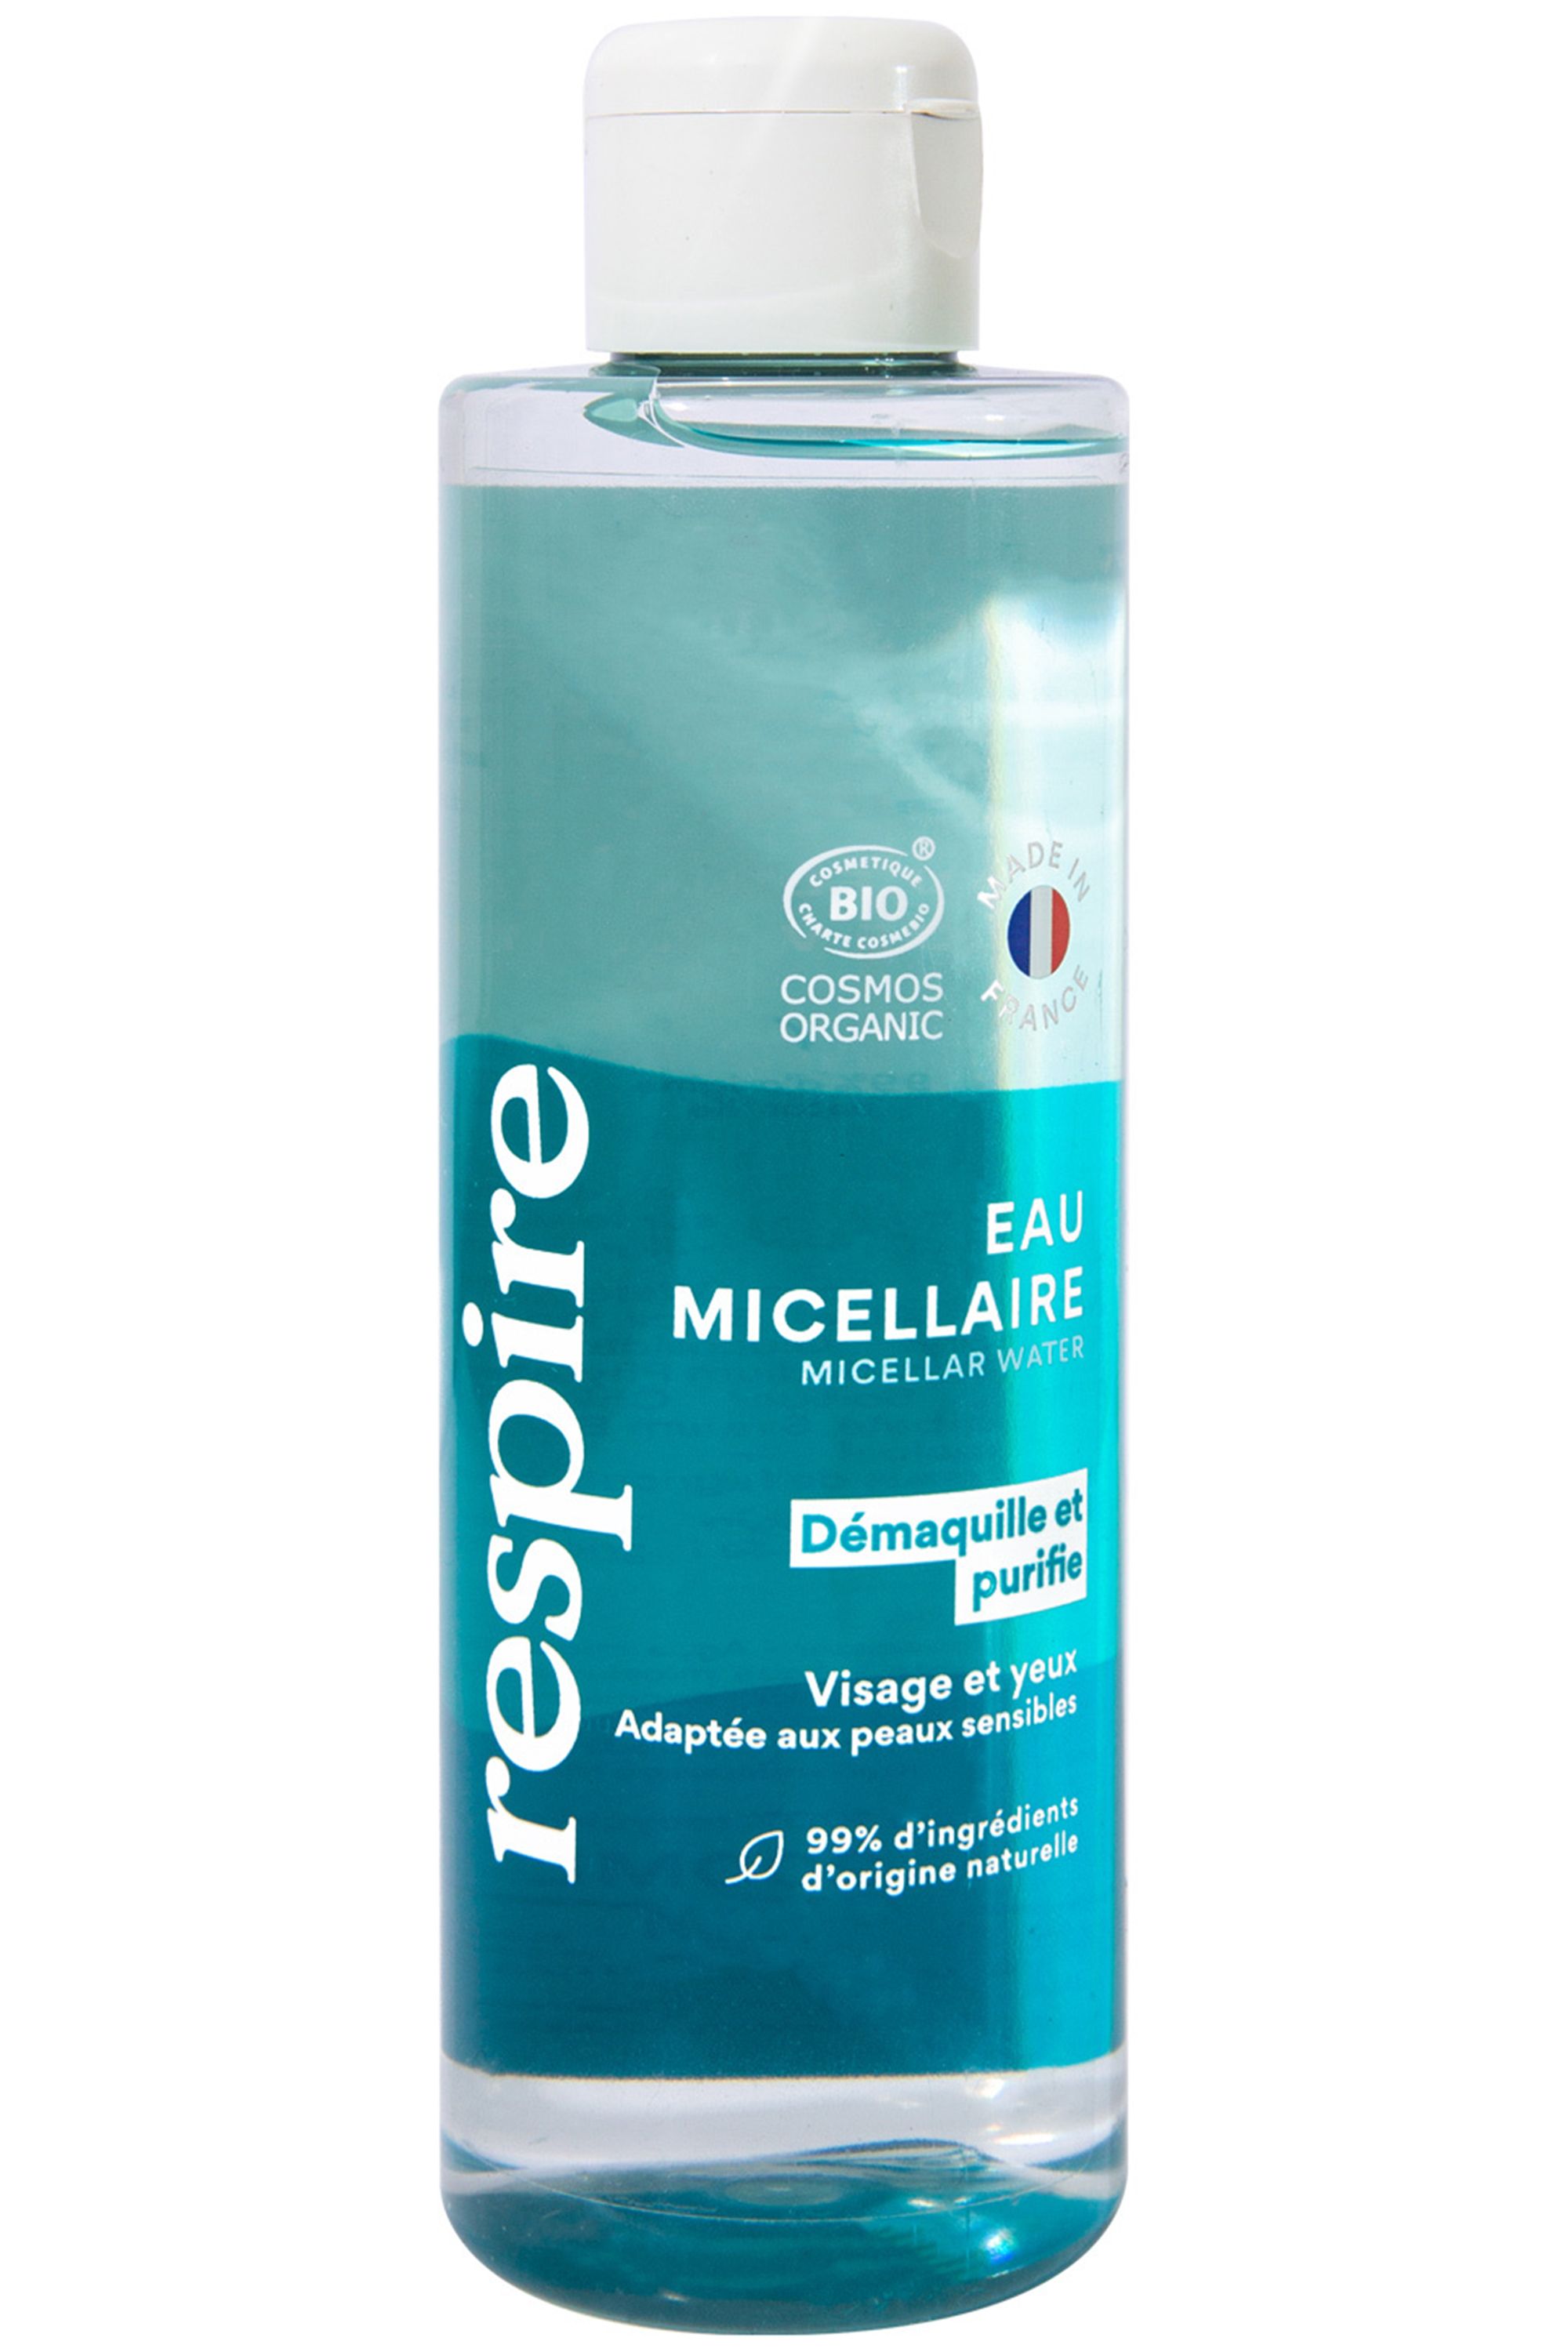 Mon eau micellaire - Formy